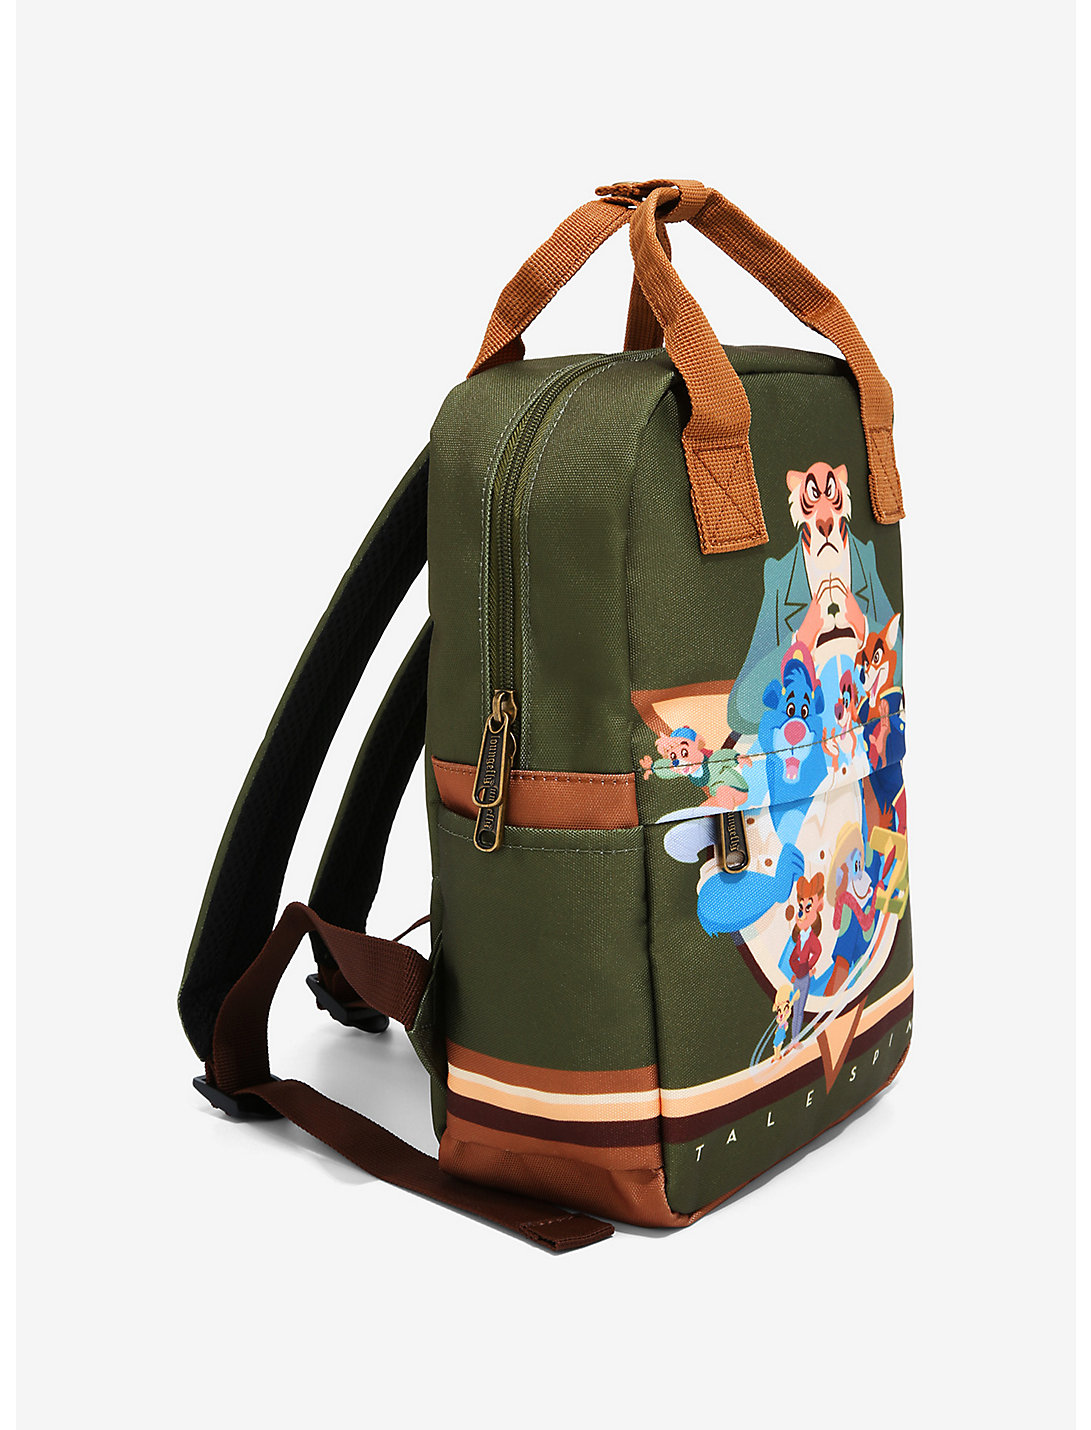 tale spin backpack